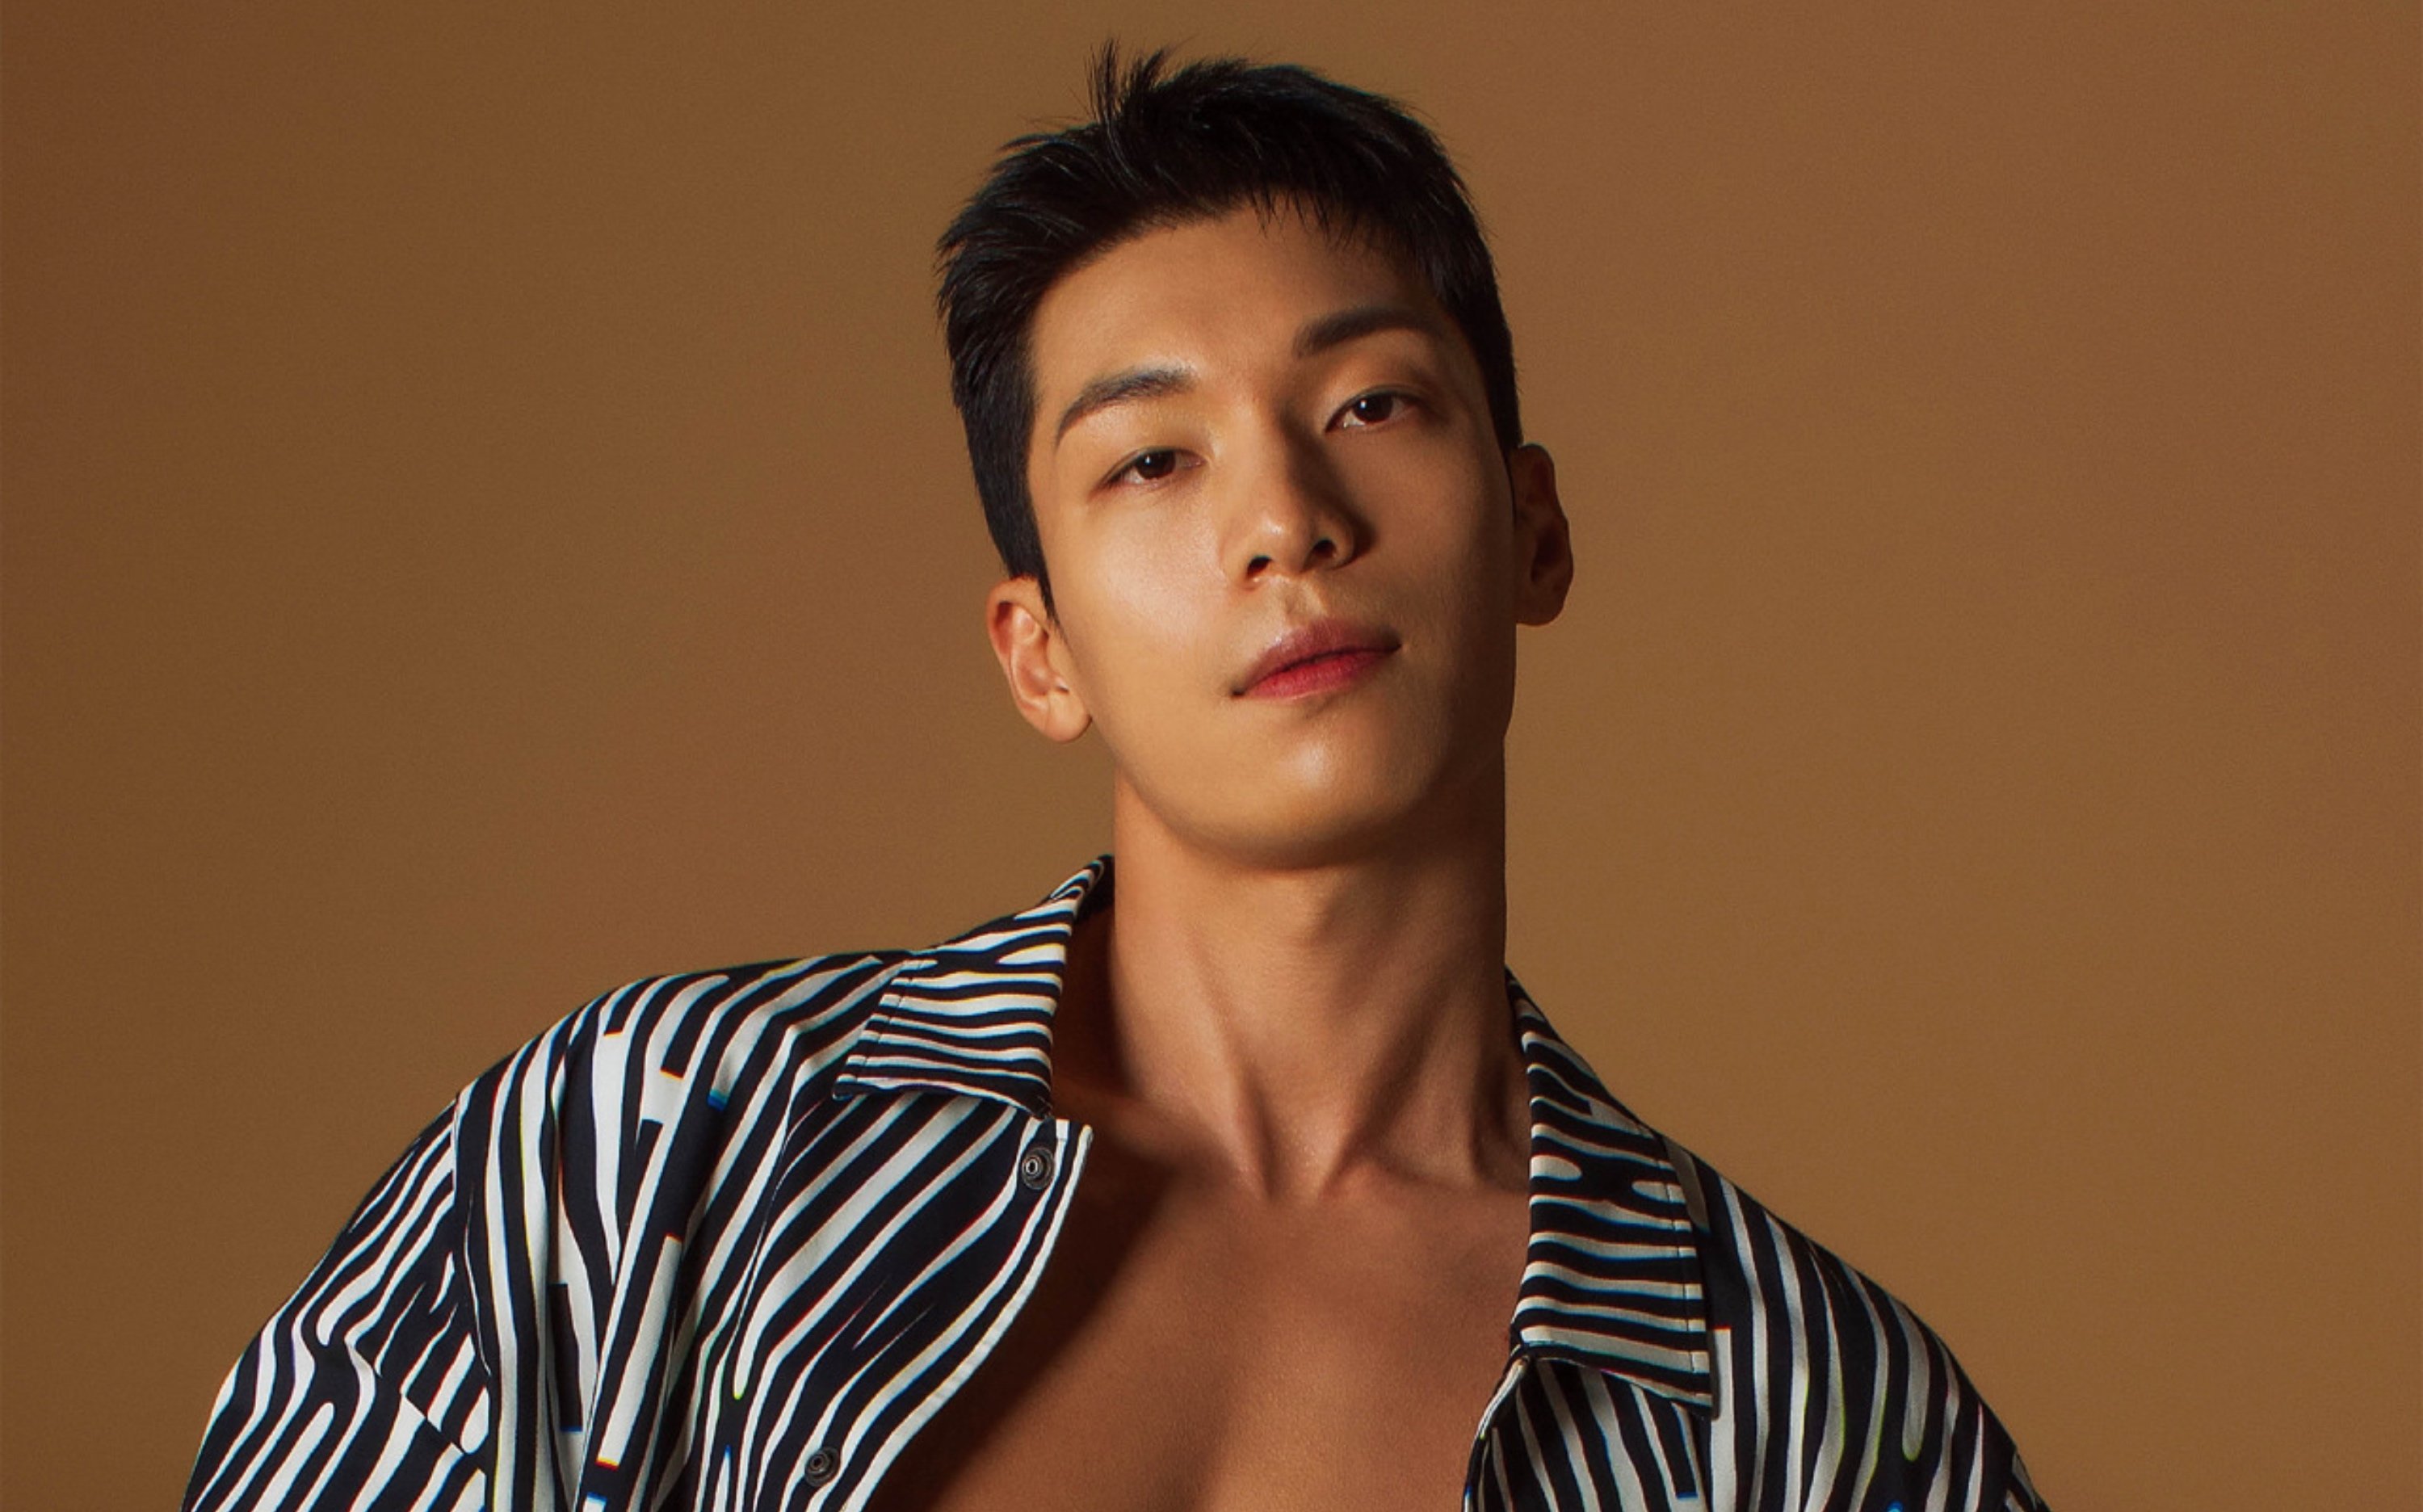 'Squid Game' actor Wi Ha-Joon for 'Men's Health Korea' wearing opened patterned shirt